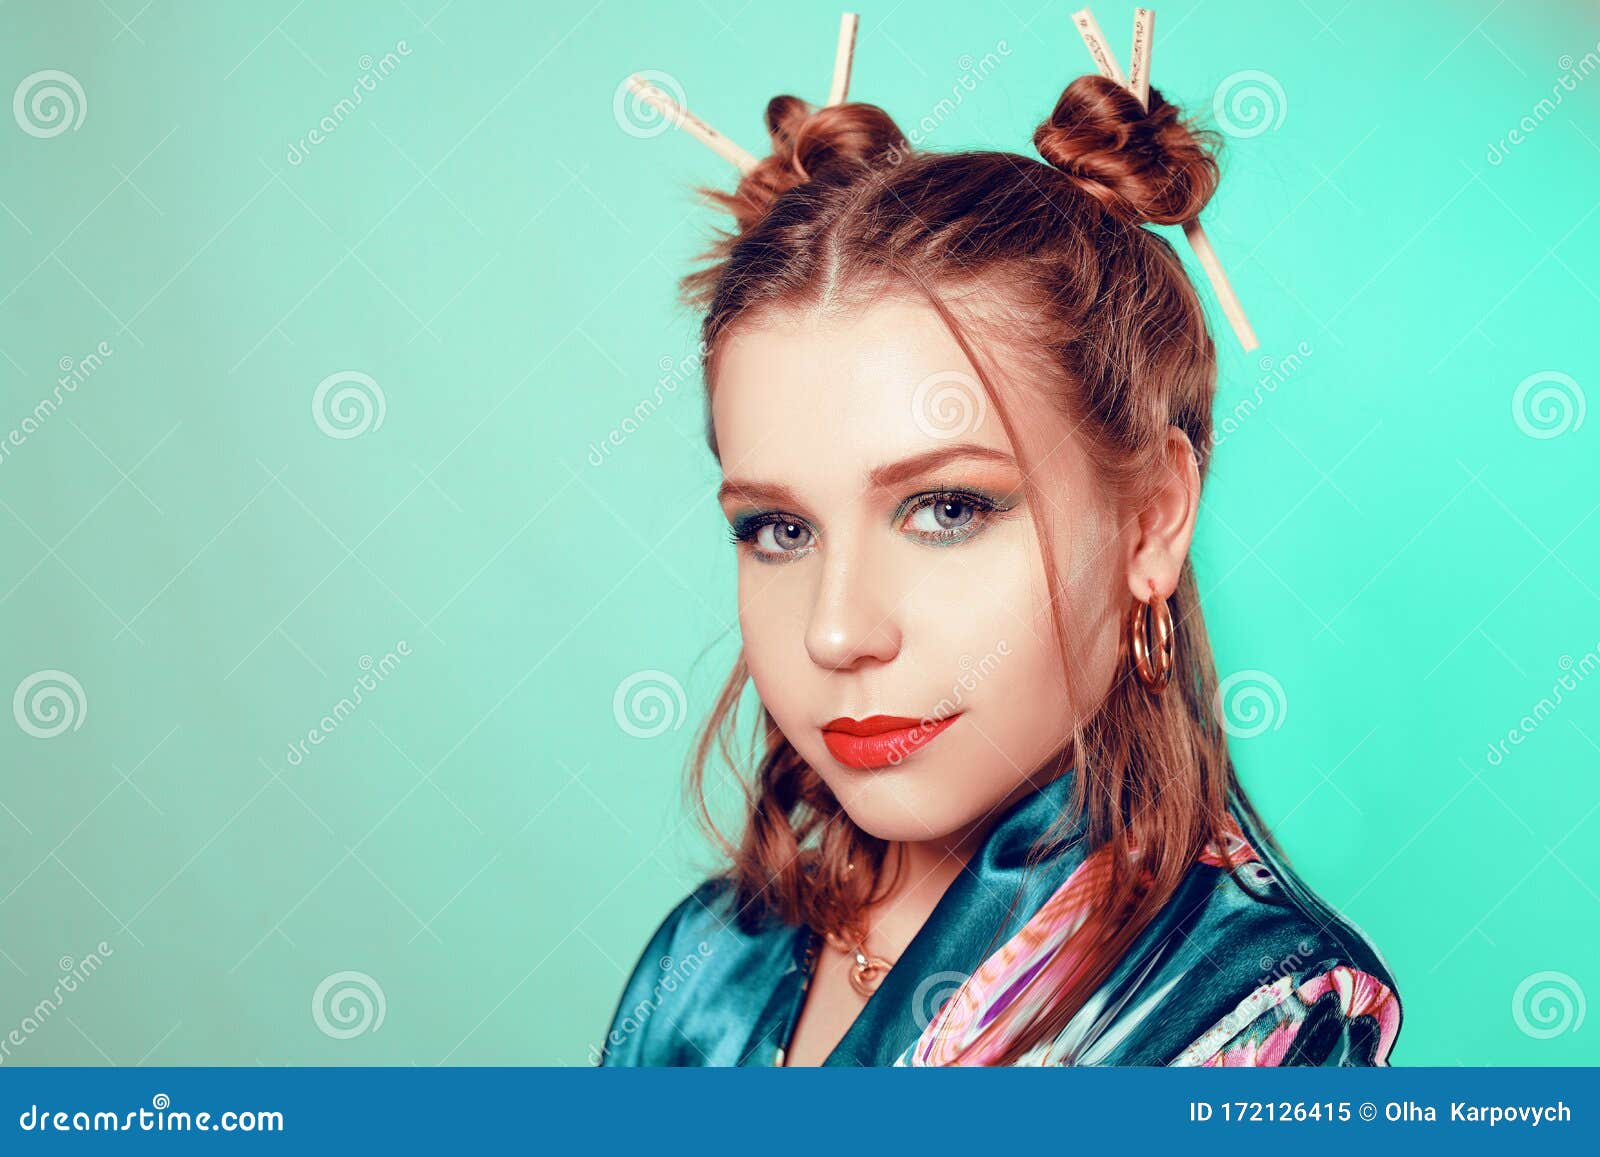 Japanese / Chinese / Asian Style Girl with Chopsticks in Her Hair. Girl  with an Interesting Hairstyle, on a Green Background in a Stock Image -  Image of person, meal: 172126415